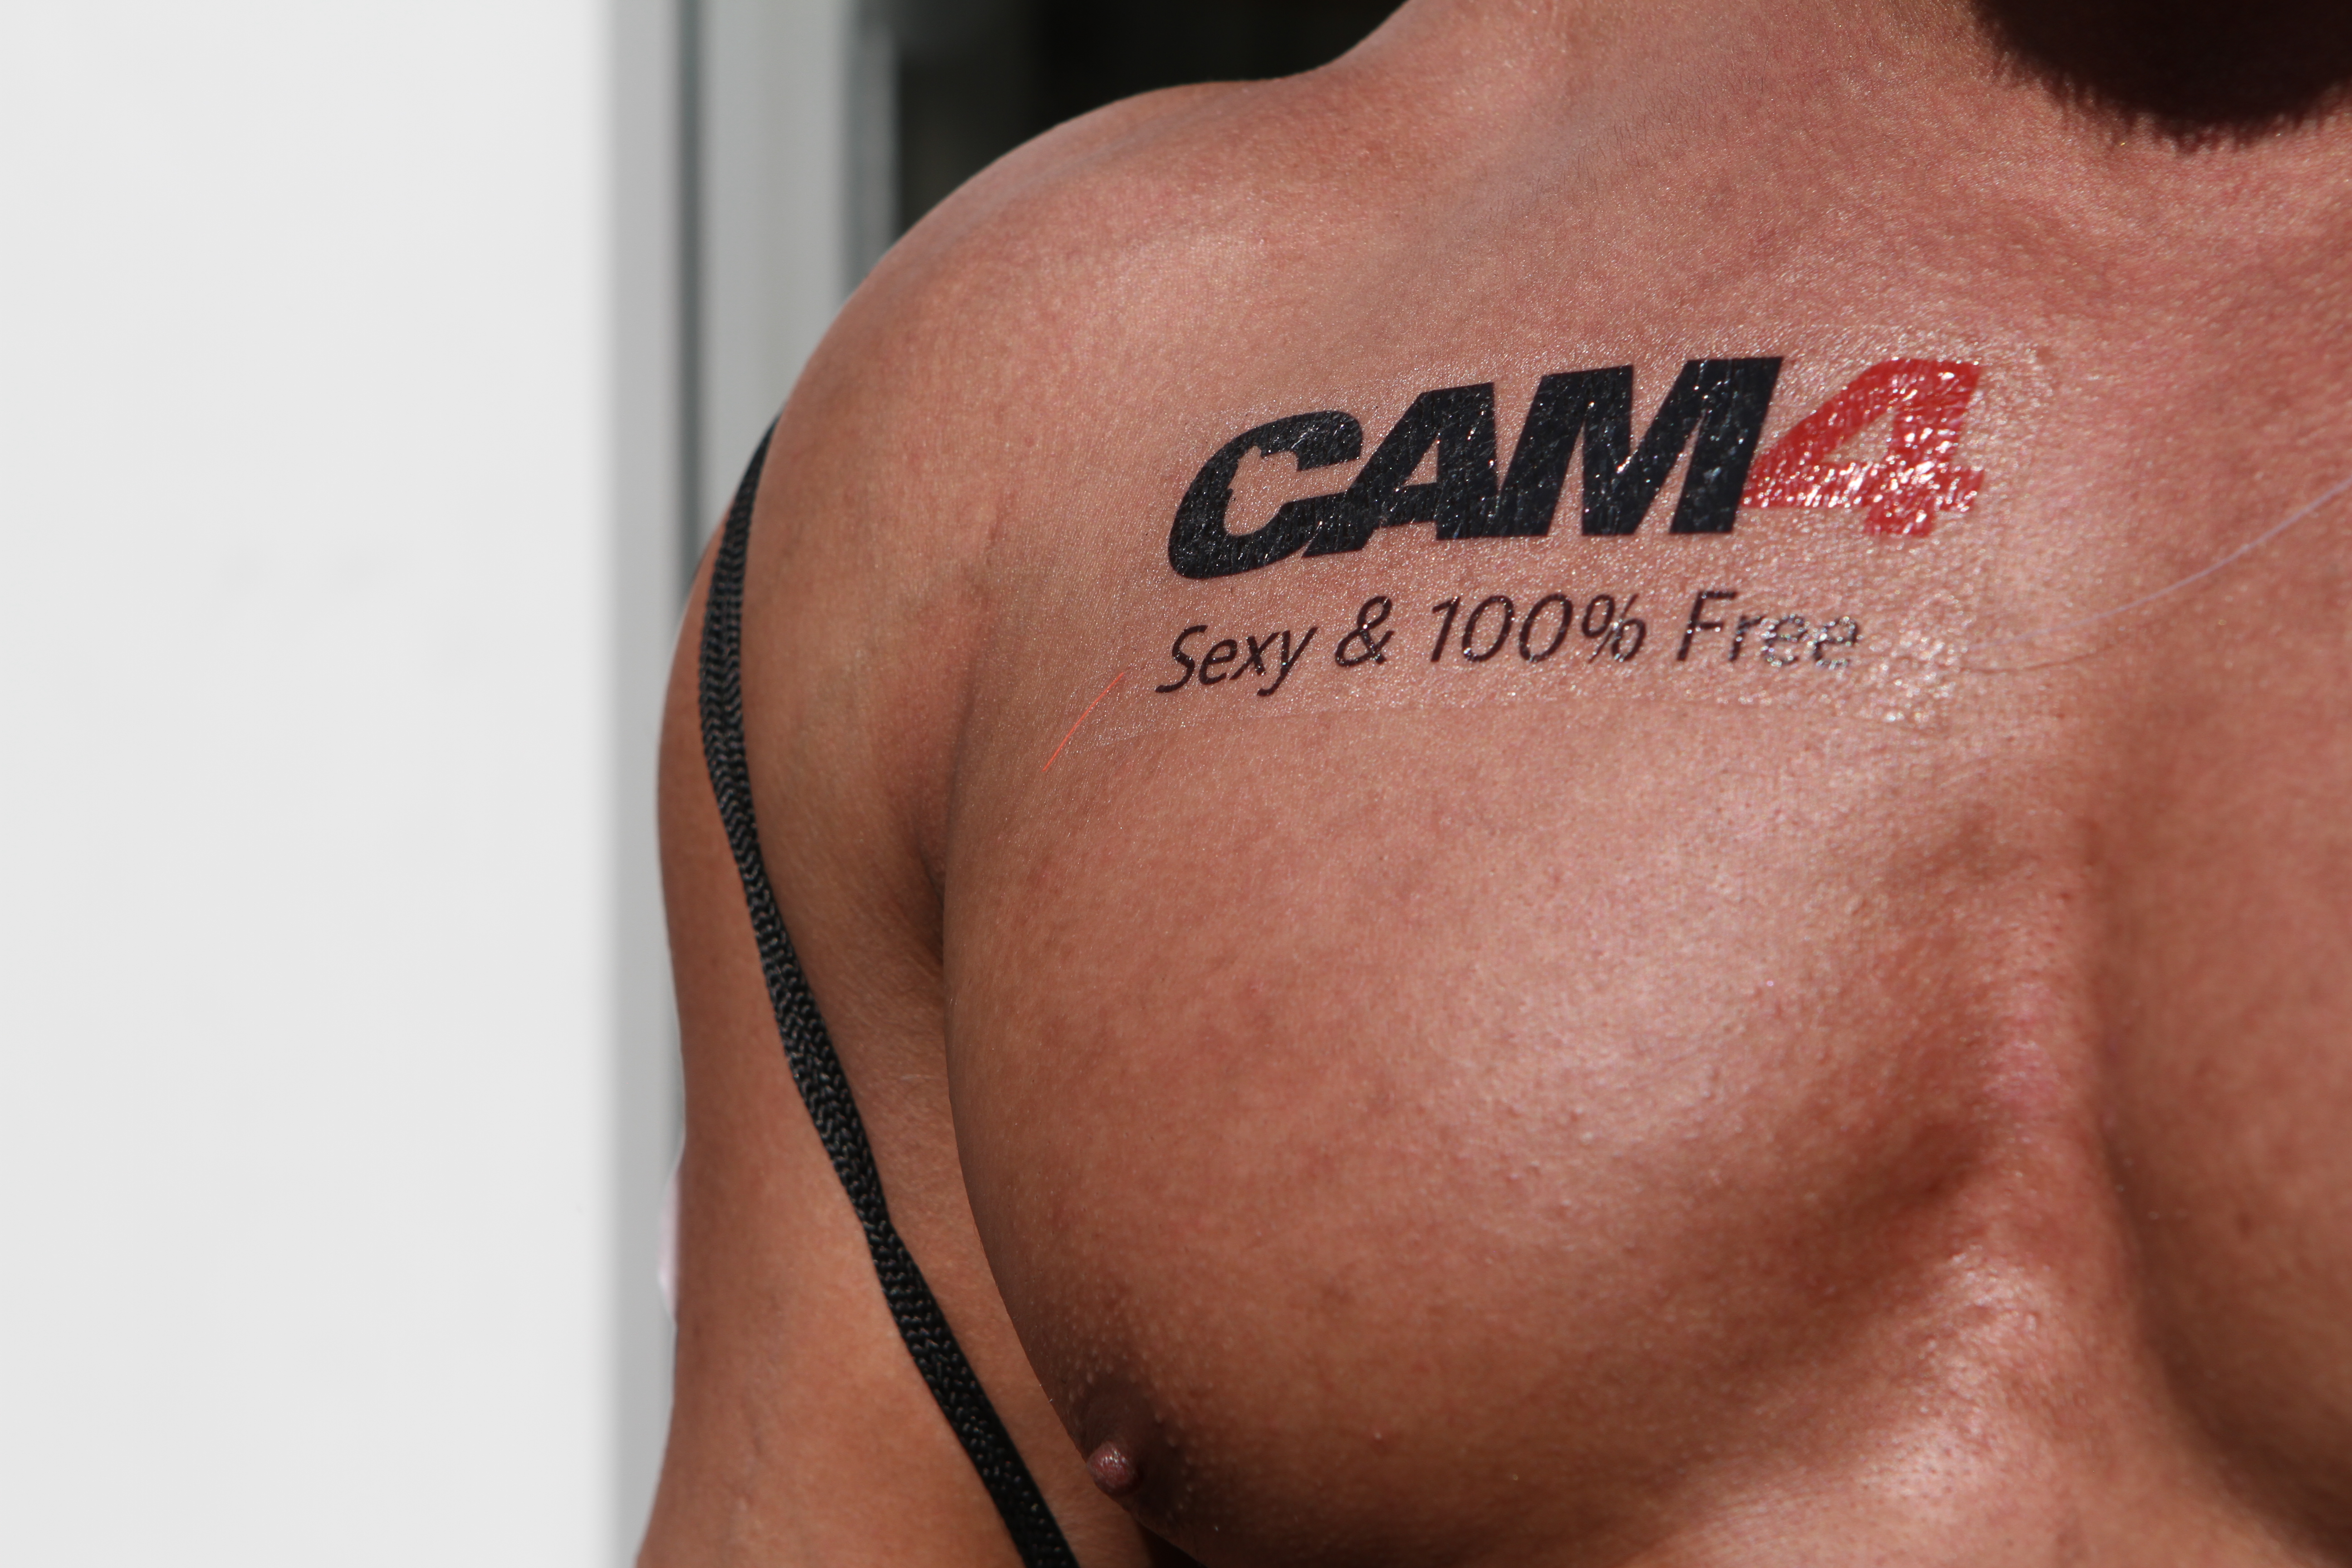 Happy 2017!! The best of CAM4 in 2016!